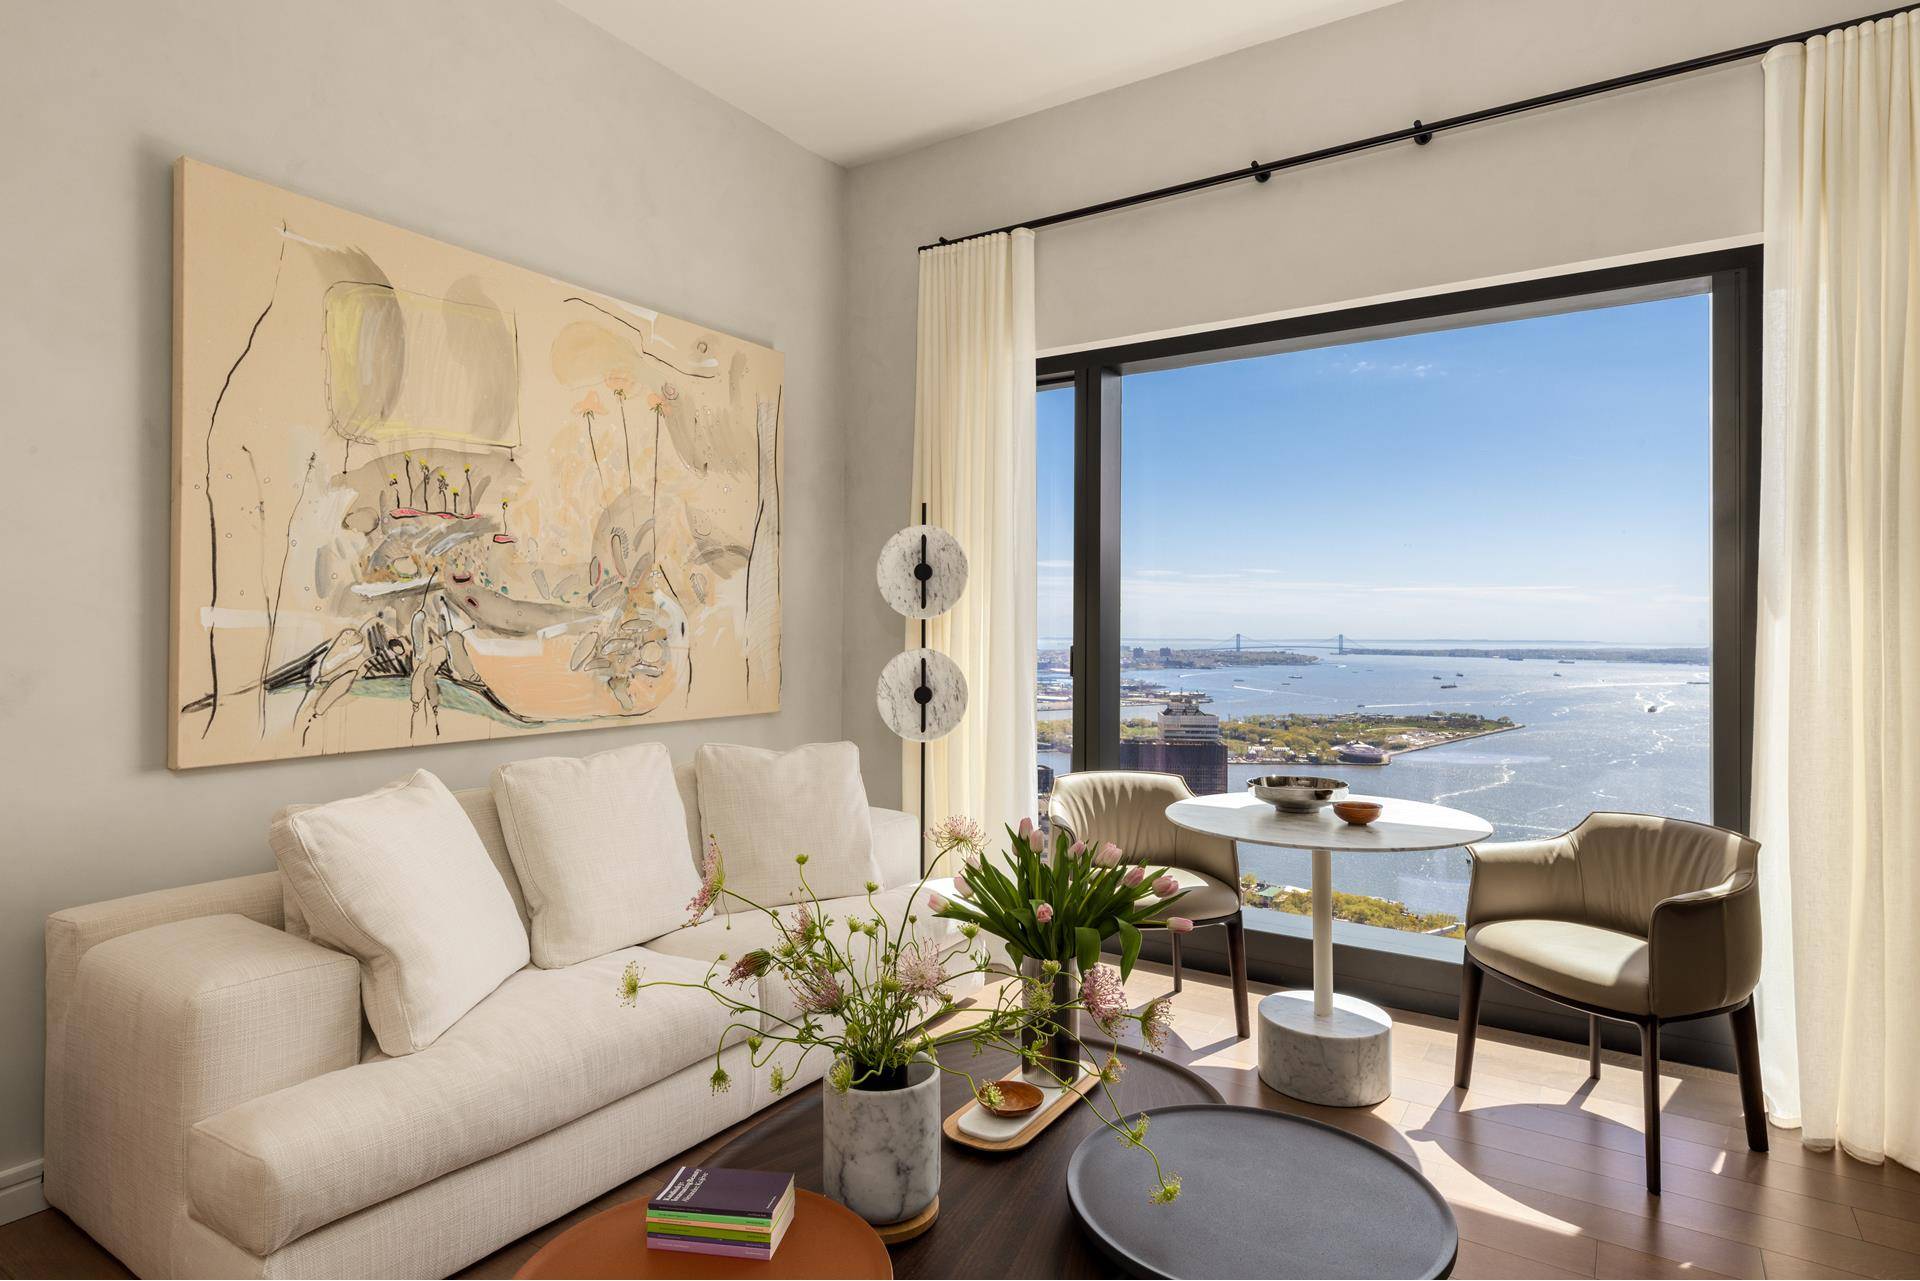 Enjoy sweeping views and double exposures from this high floor studio home.